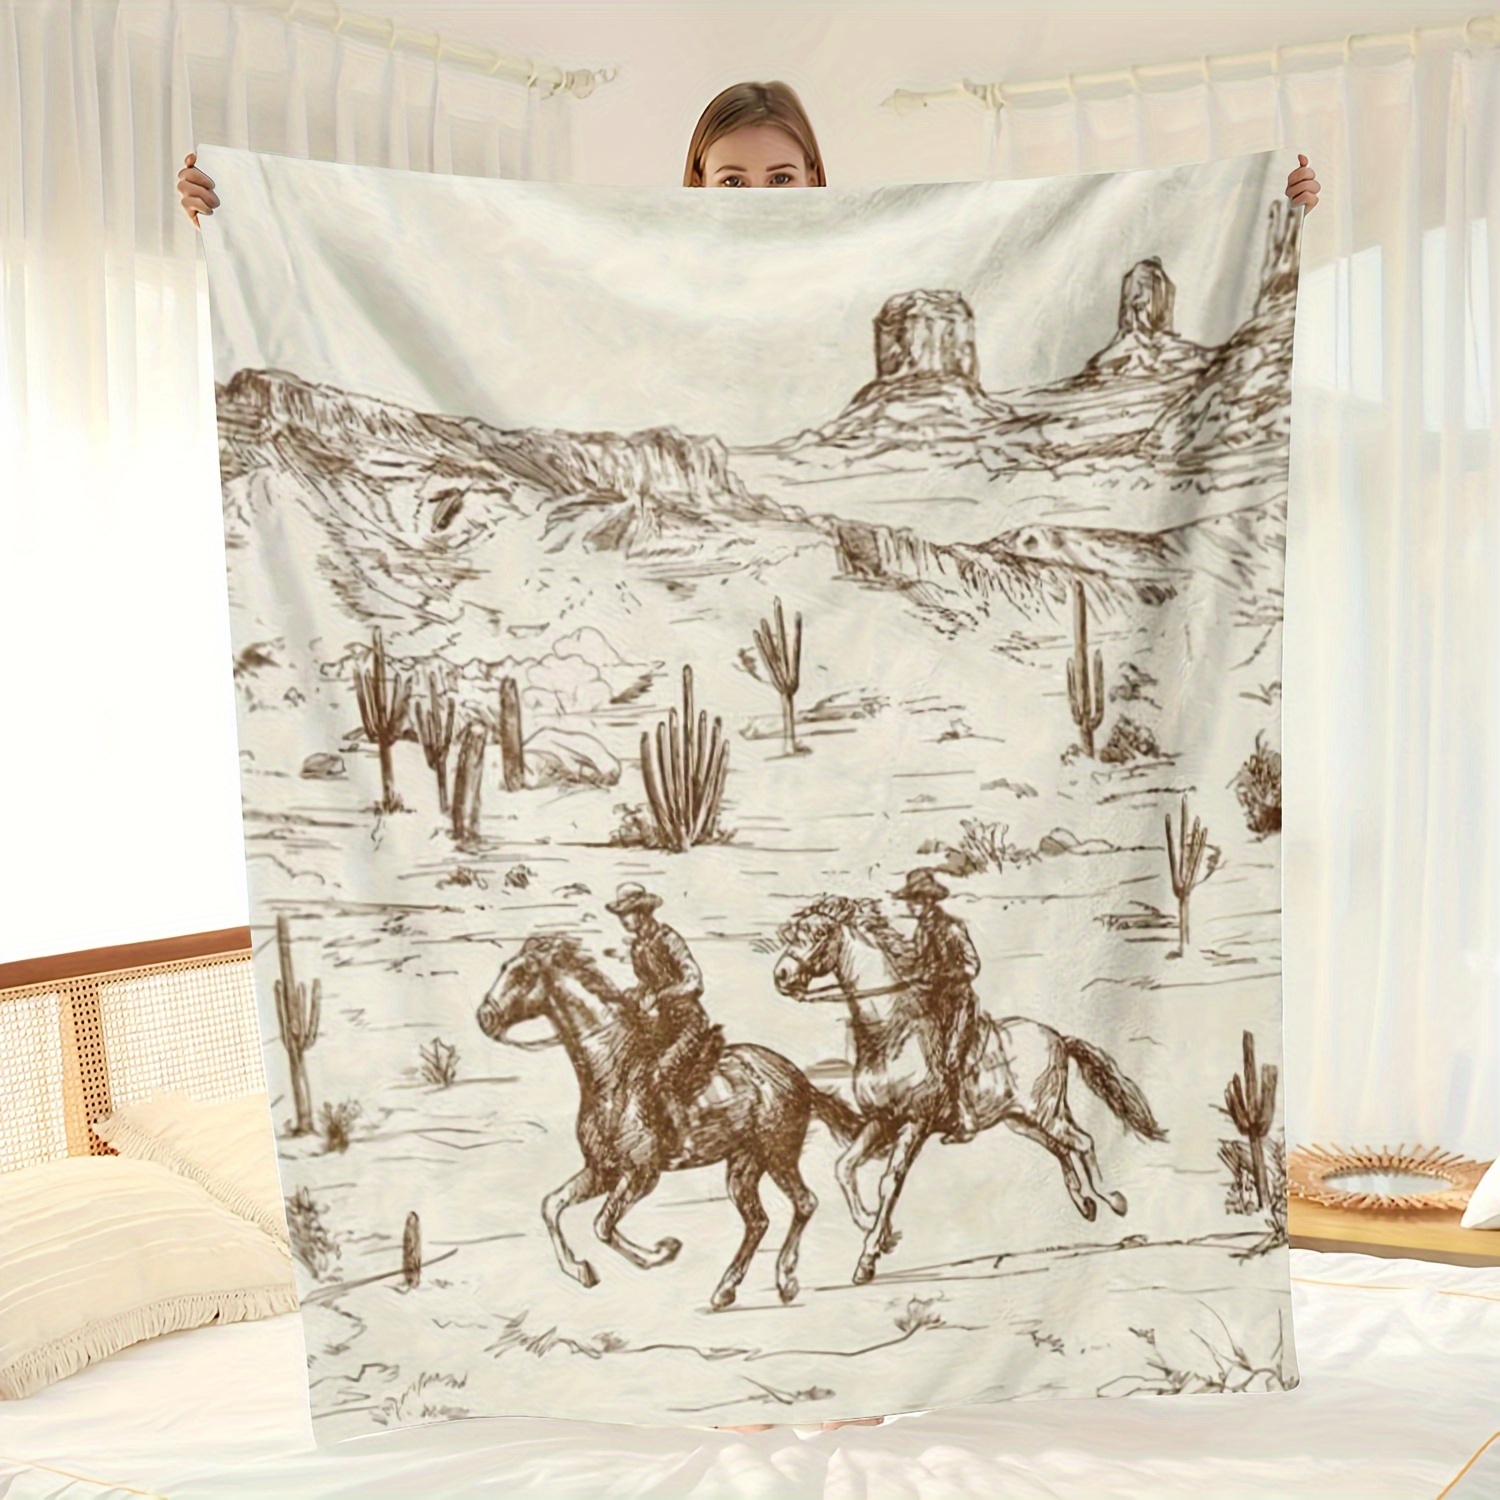 

Vintage Western Cowboy Sketch Soft Flannel Blanket - Perfect Gift For Good Friends, All-season Knitted Polyester Throw, Digital Print, 200-250g Fabric Weight, Ideal For Bedding - 1pc